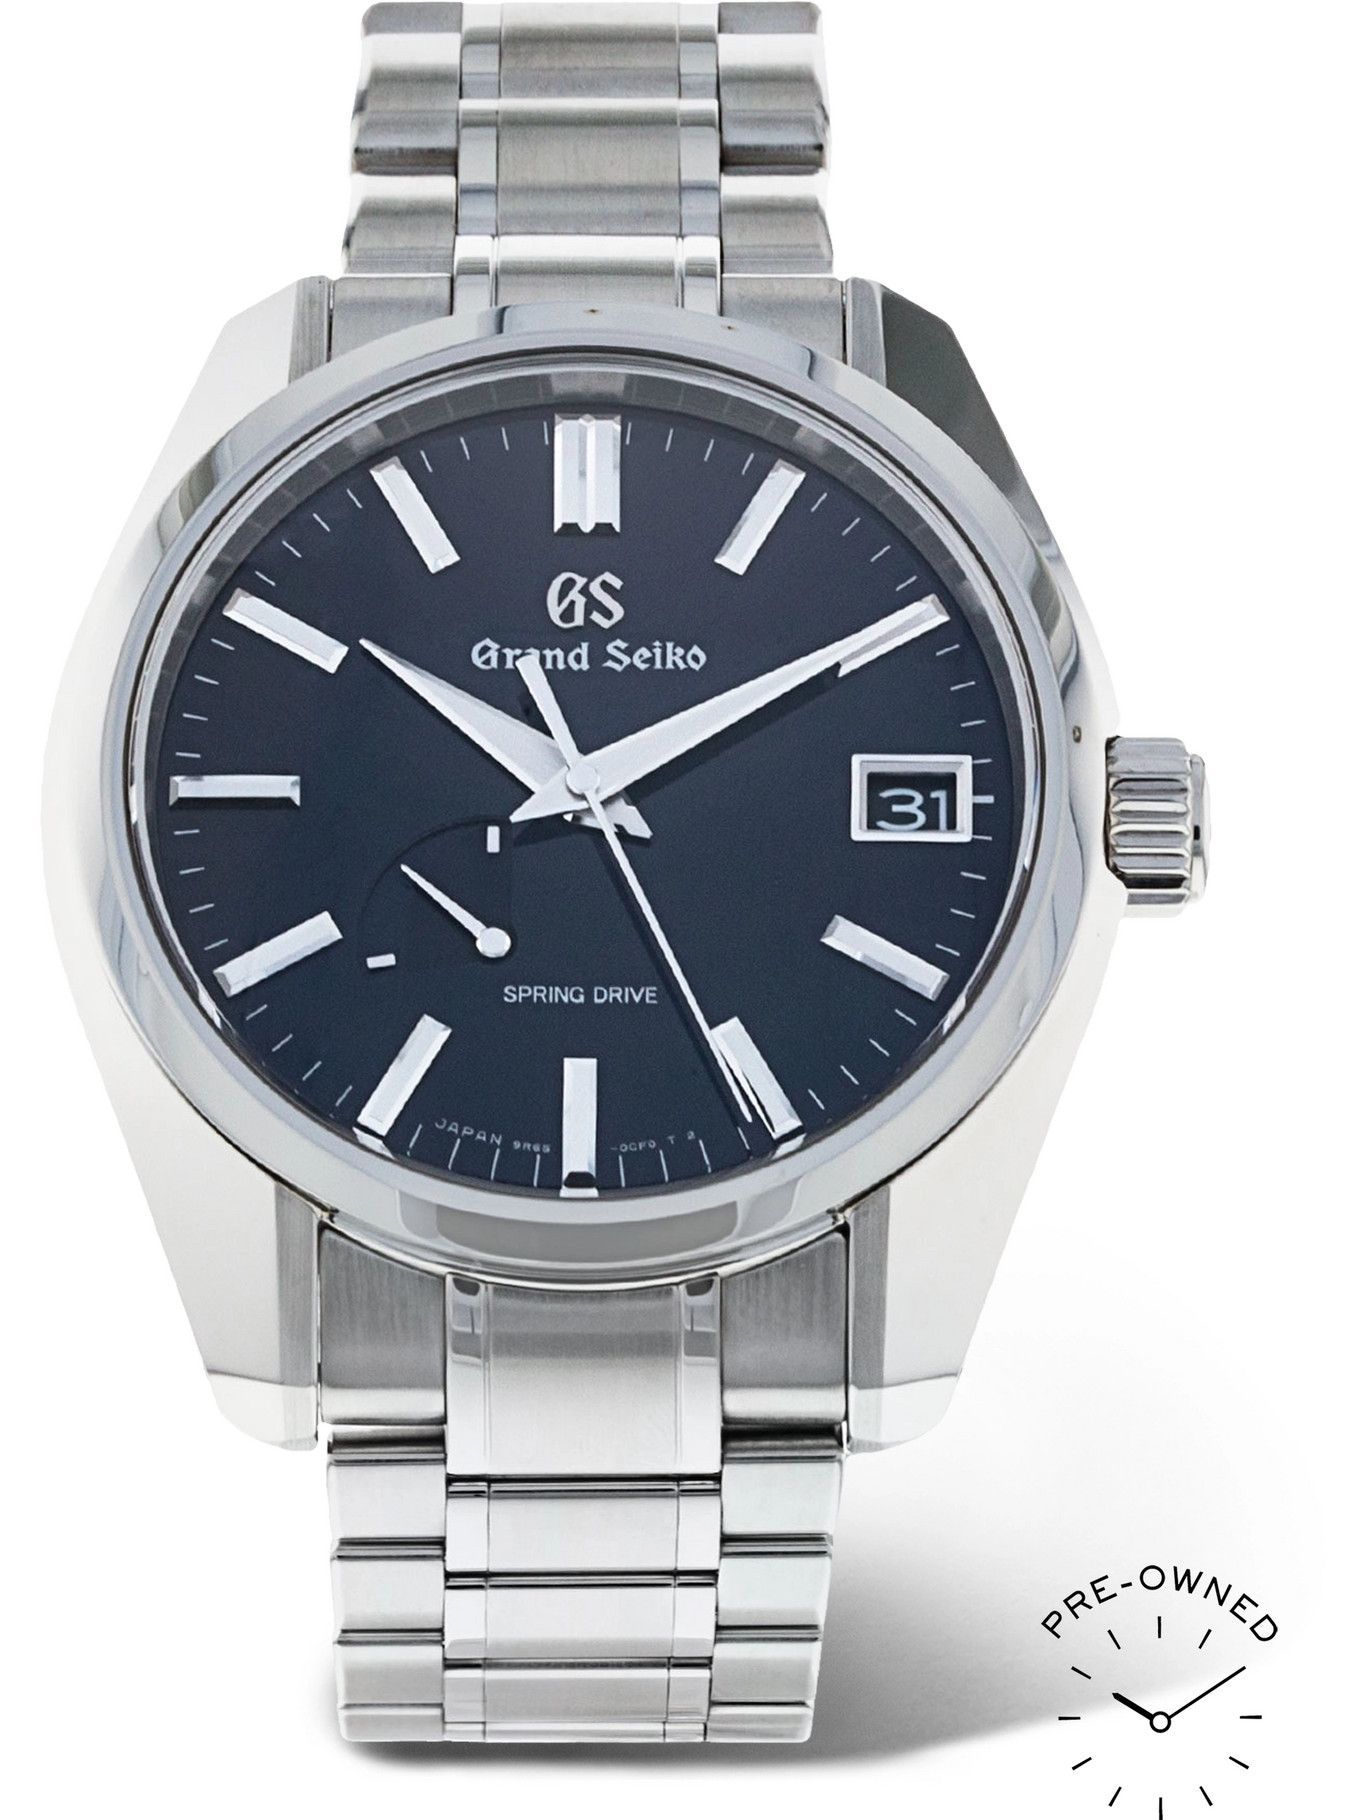 Grand Seiko - Pre-Owned 2014 Self-Dater Limited Edition 37mm Stainless  Steel Watch, Ref. No. SBGV011 Grand Seiko